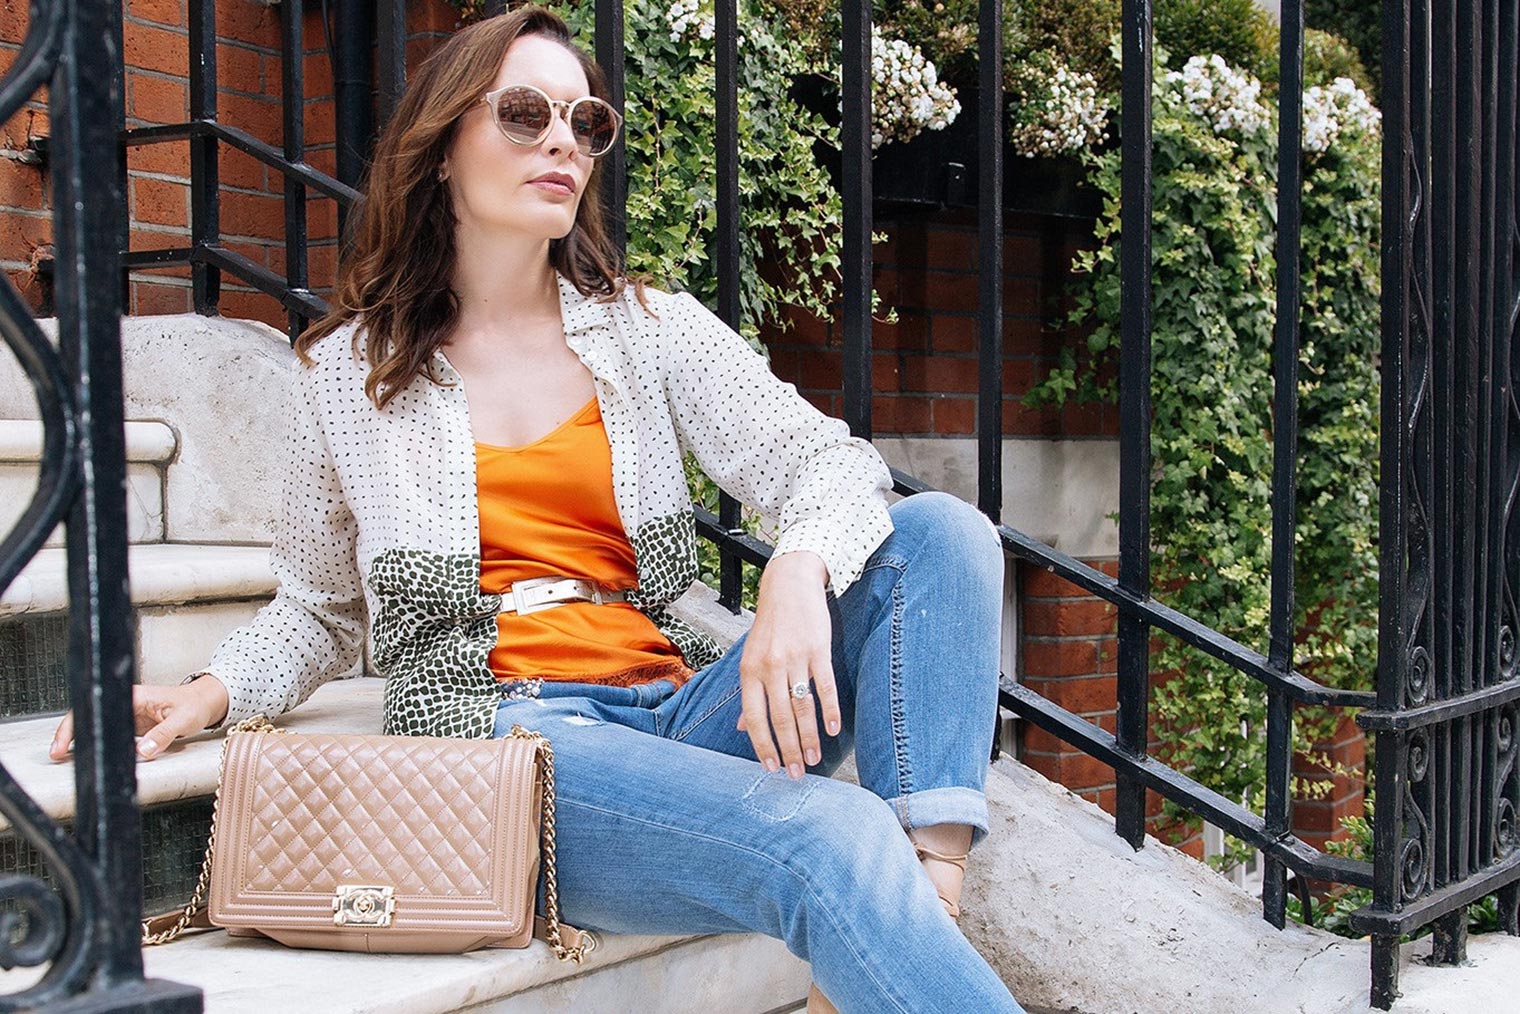 How to create simple and chic outfit for your day out of office